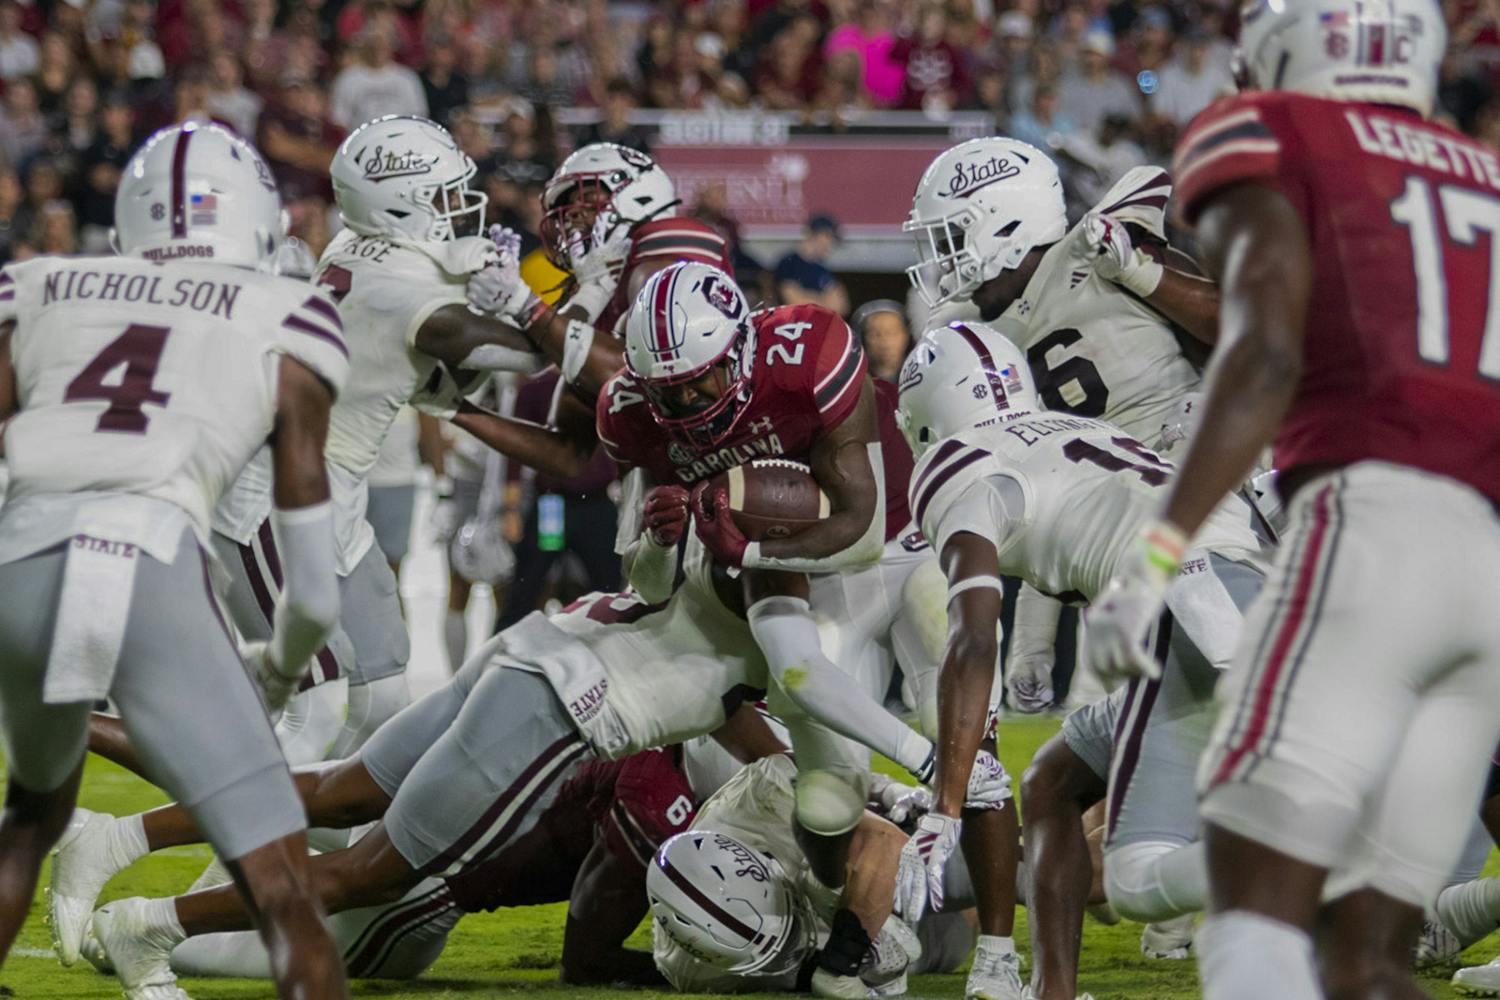 Redshirt senior running back Mario Anderson rushes in for a Gamecock-touchdown attempt at Williams-Brice Stadium on Sept. 23, 2023. Anderson rushed for a 鶹С򽴫ý-high 88 yards on 26 carries.